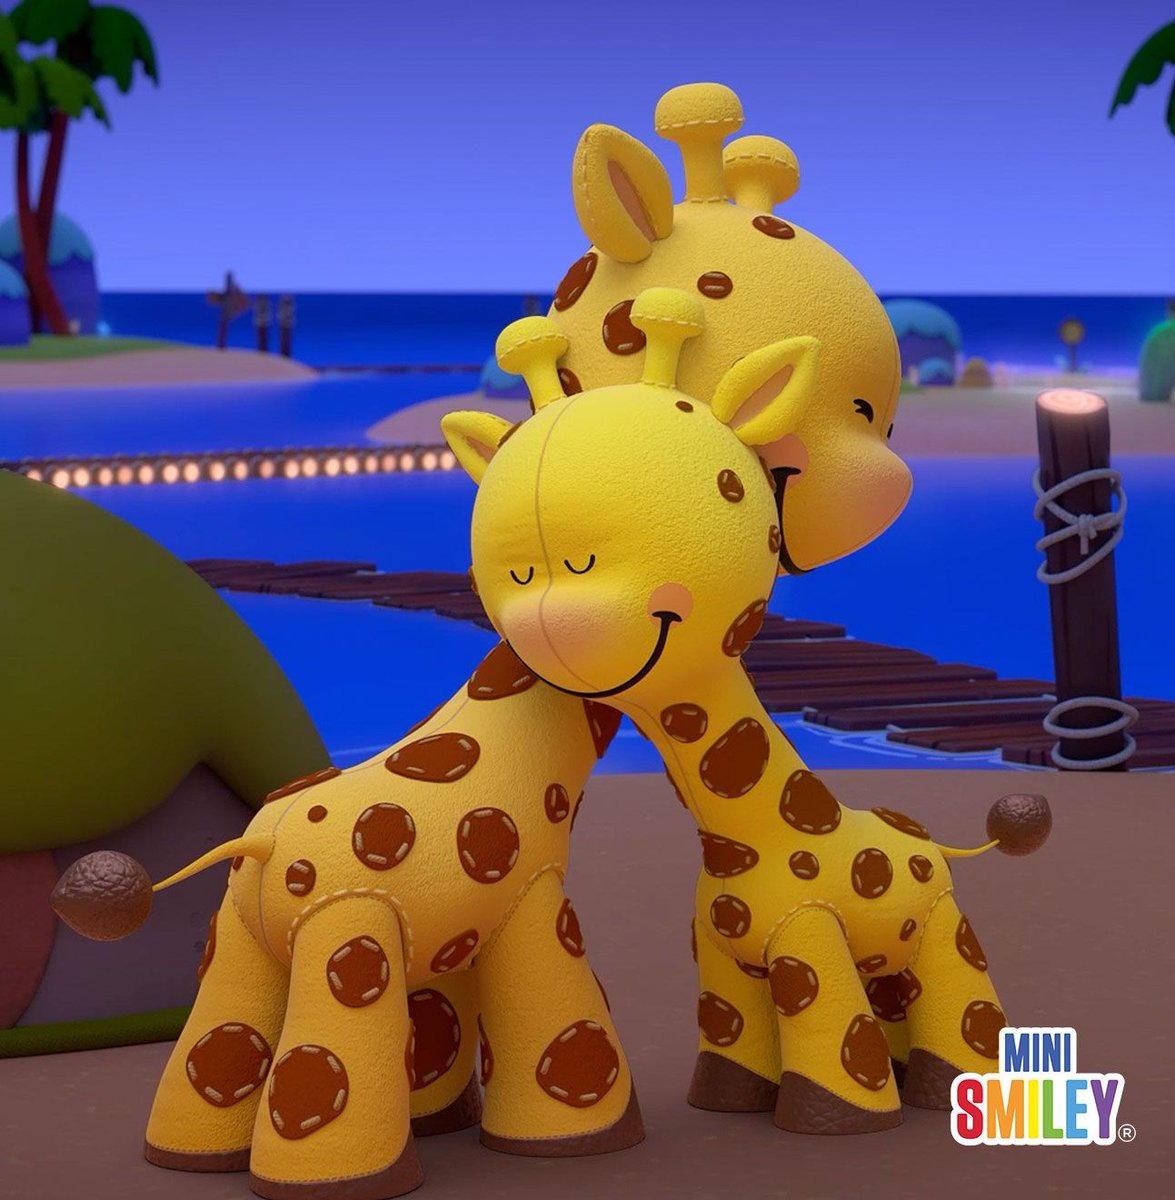 Stretching love to new heights 🦒💛 

#MiniSmiley #TuesdayHugDay #hugs #giraffe #love #family #YouAndMe #together